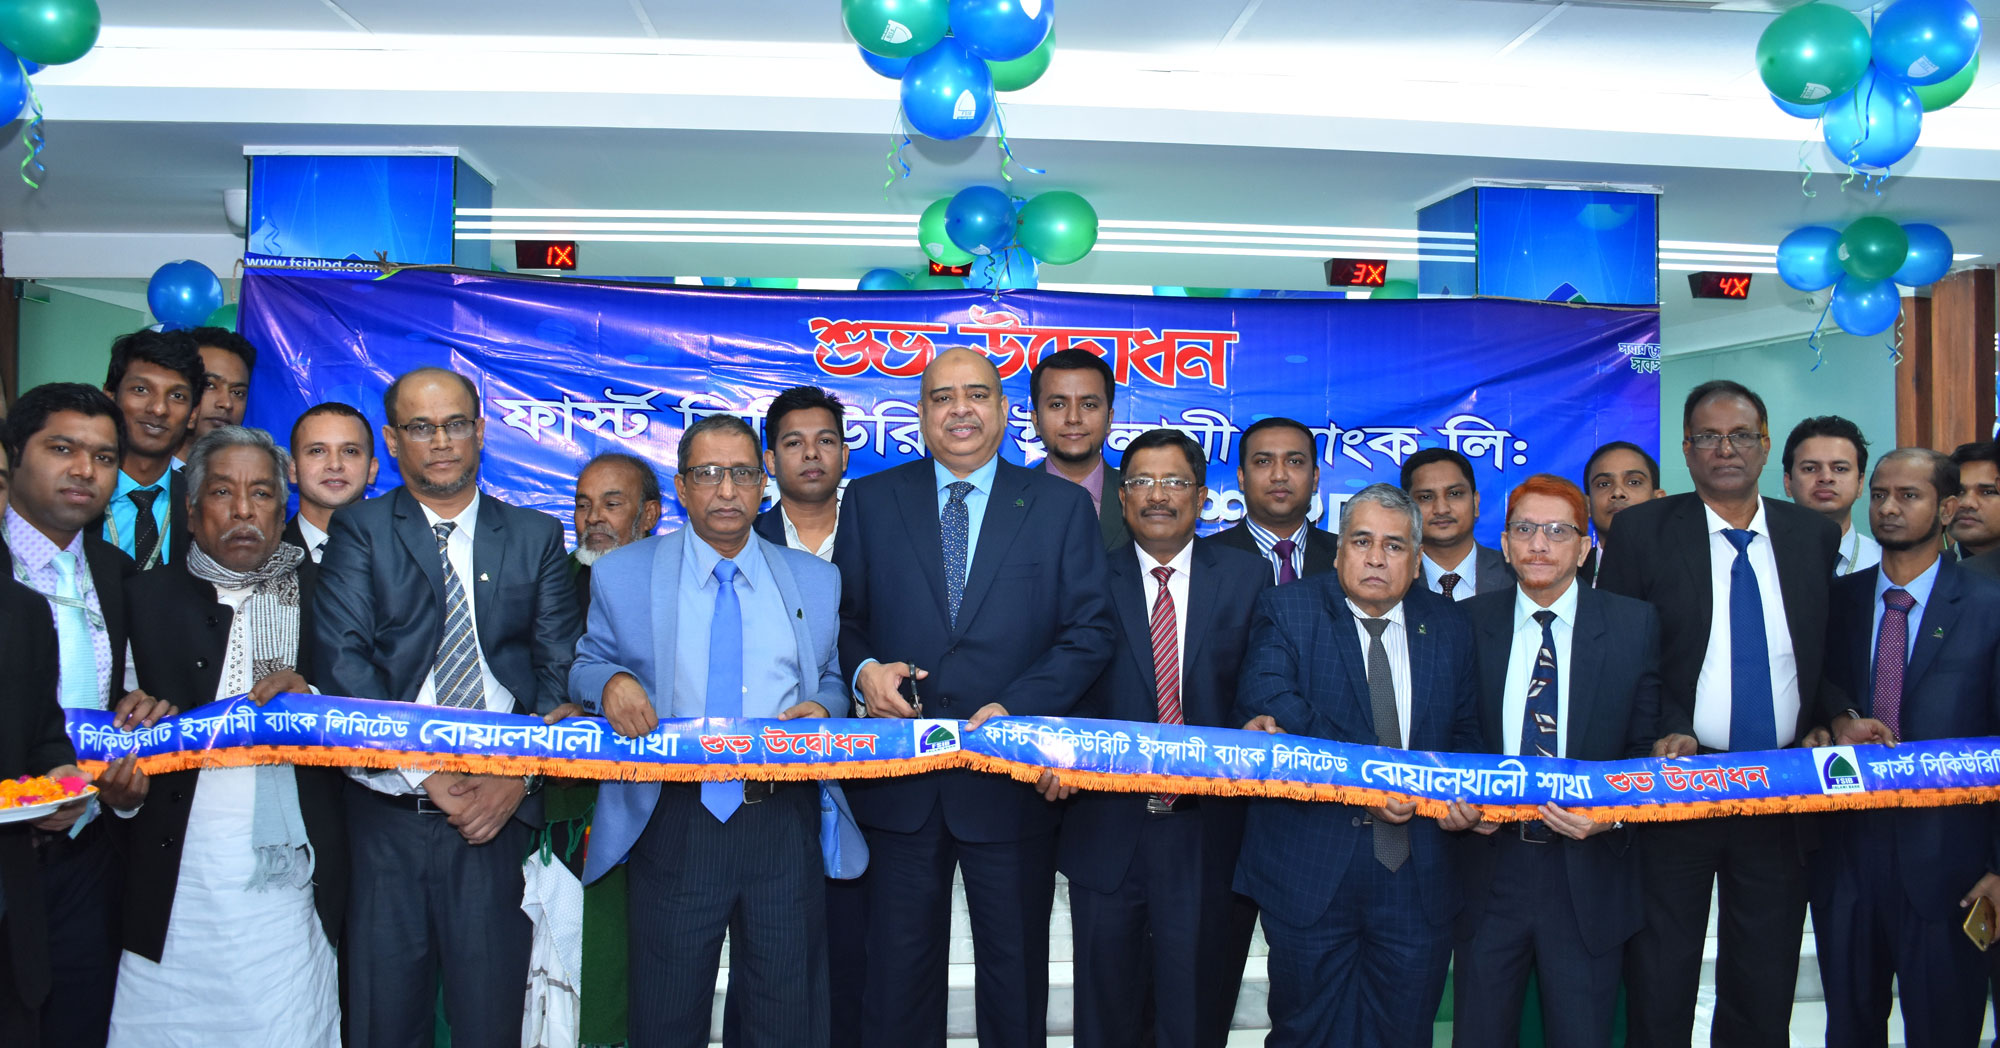 Inauguration of Boalkhali Branch of First Security Islami Bank Limited